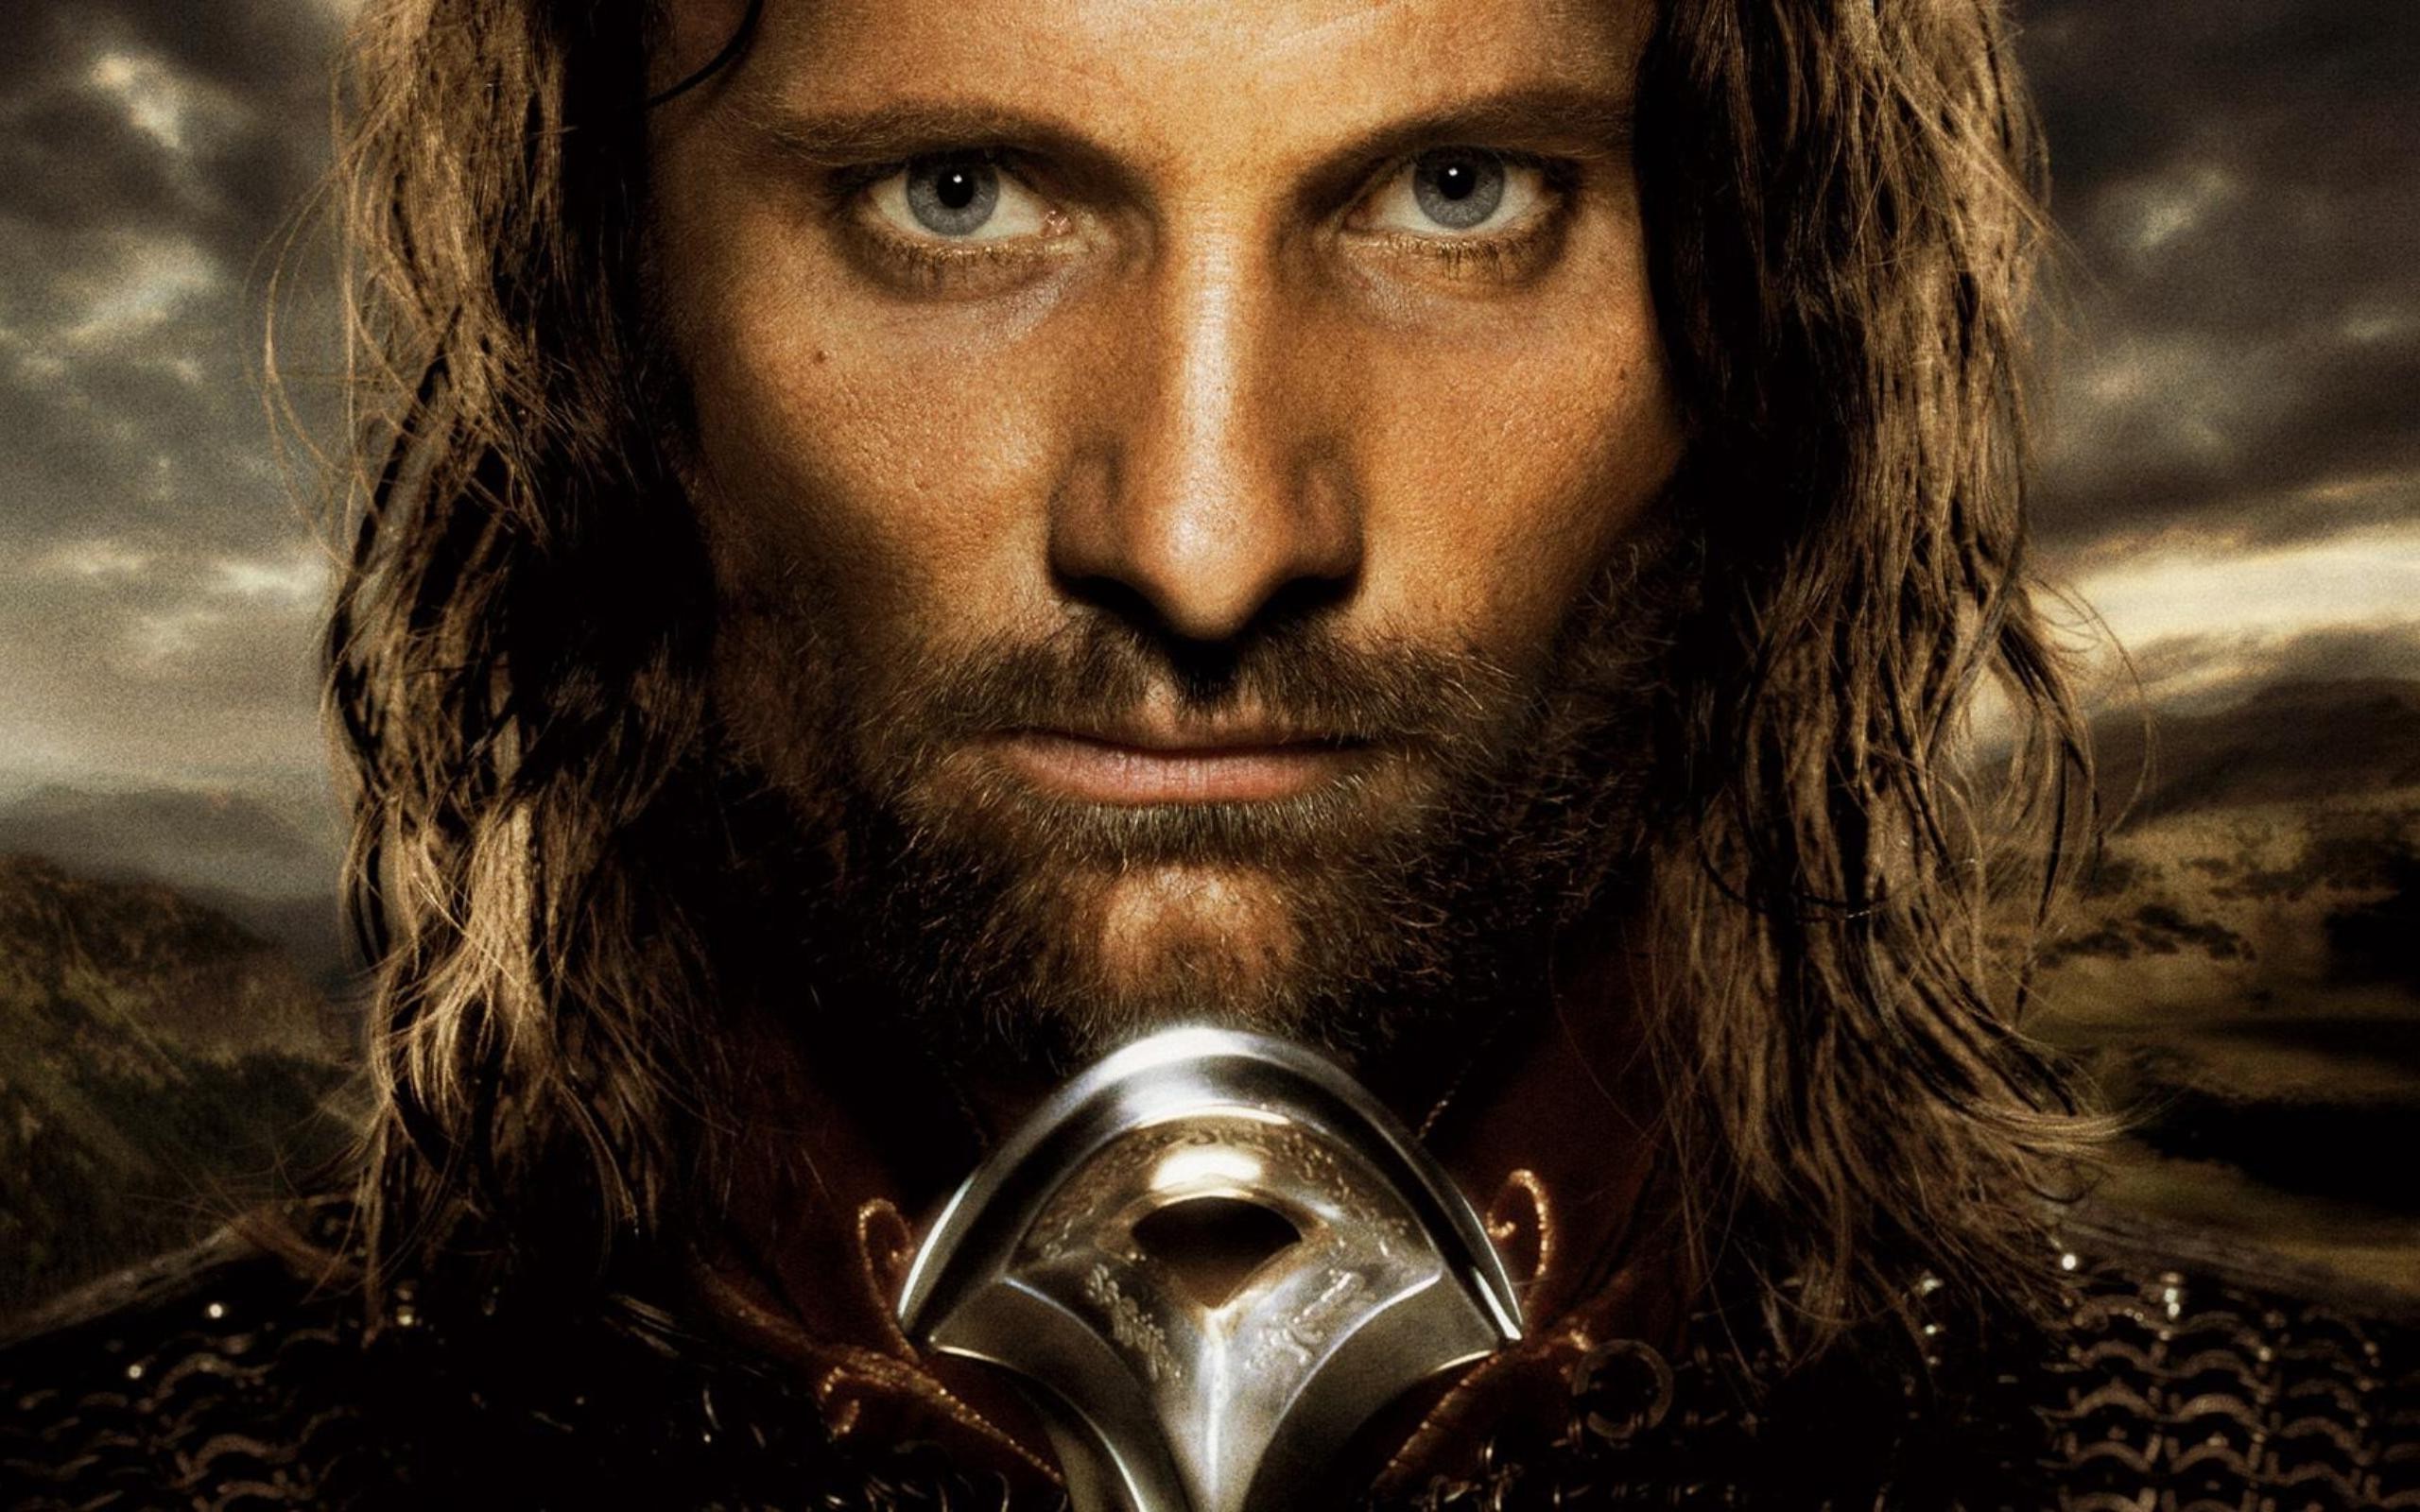 ... -Viggo_Mortensen-The_Lord_of_the_Rings_The_Return_of_the_King.jpg